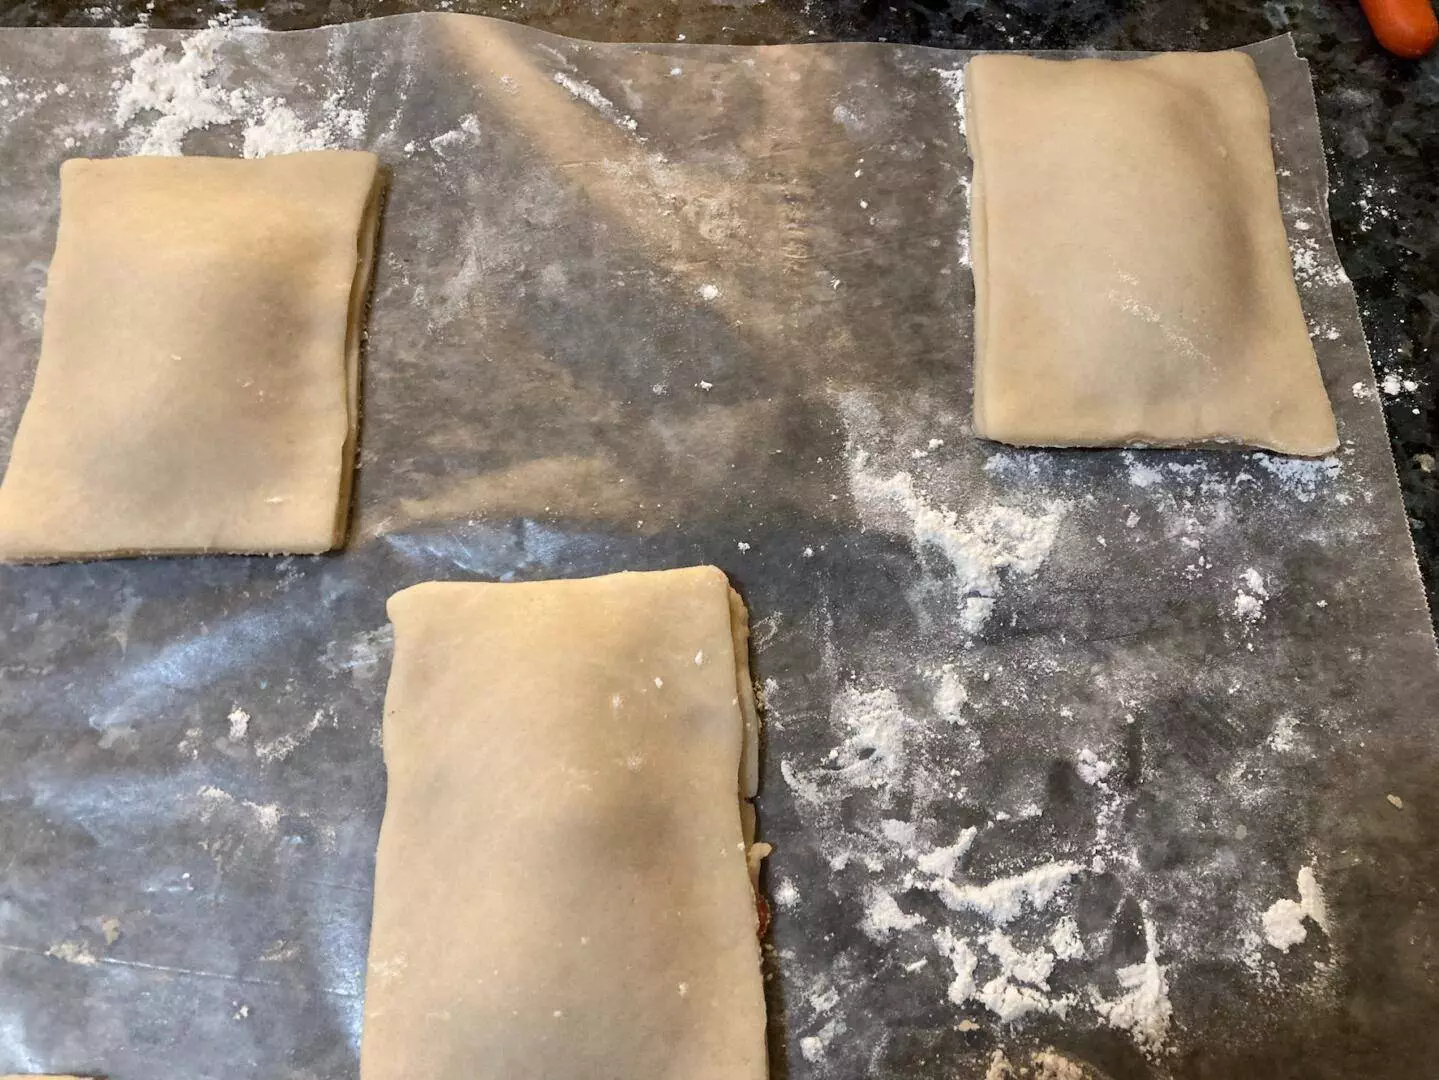 Homemade Pop Tarts from Out of the Box Baking.com